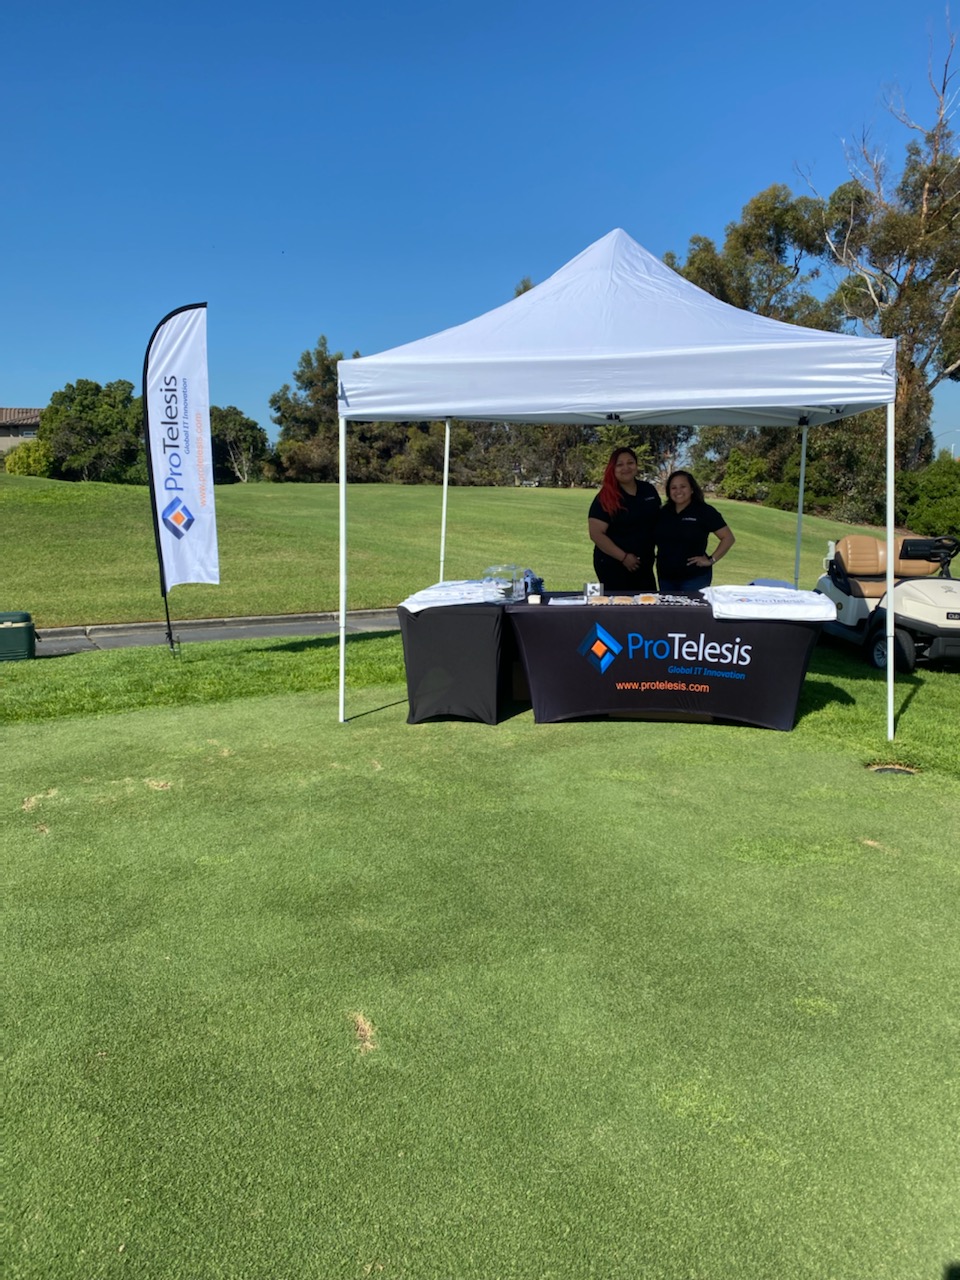 ProTelesis team standing ath the company stand at the San Ysidro Health's 16th Annual Clasico de Golf tournament, with the logo falg in frame.